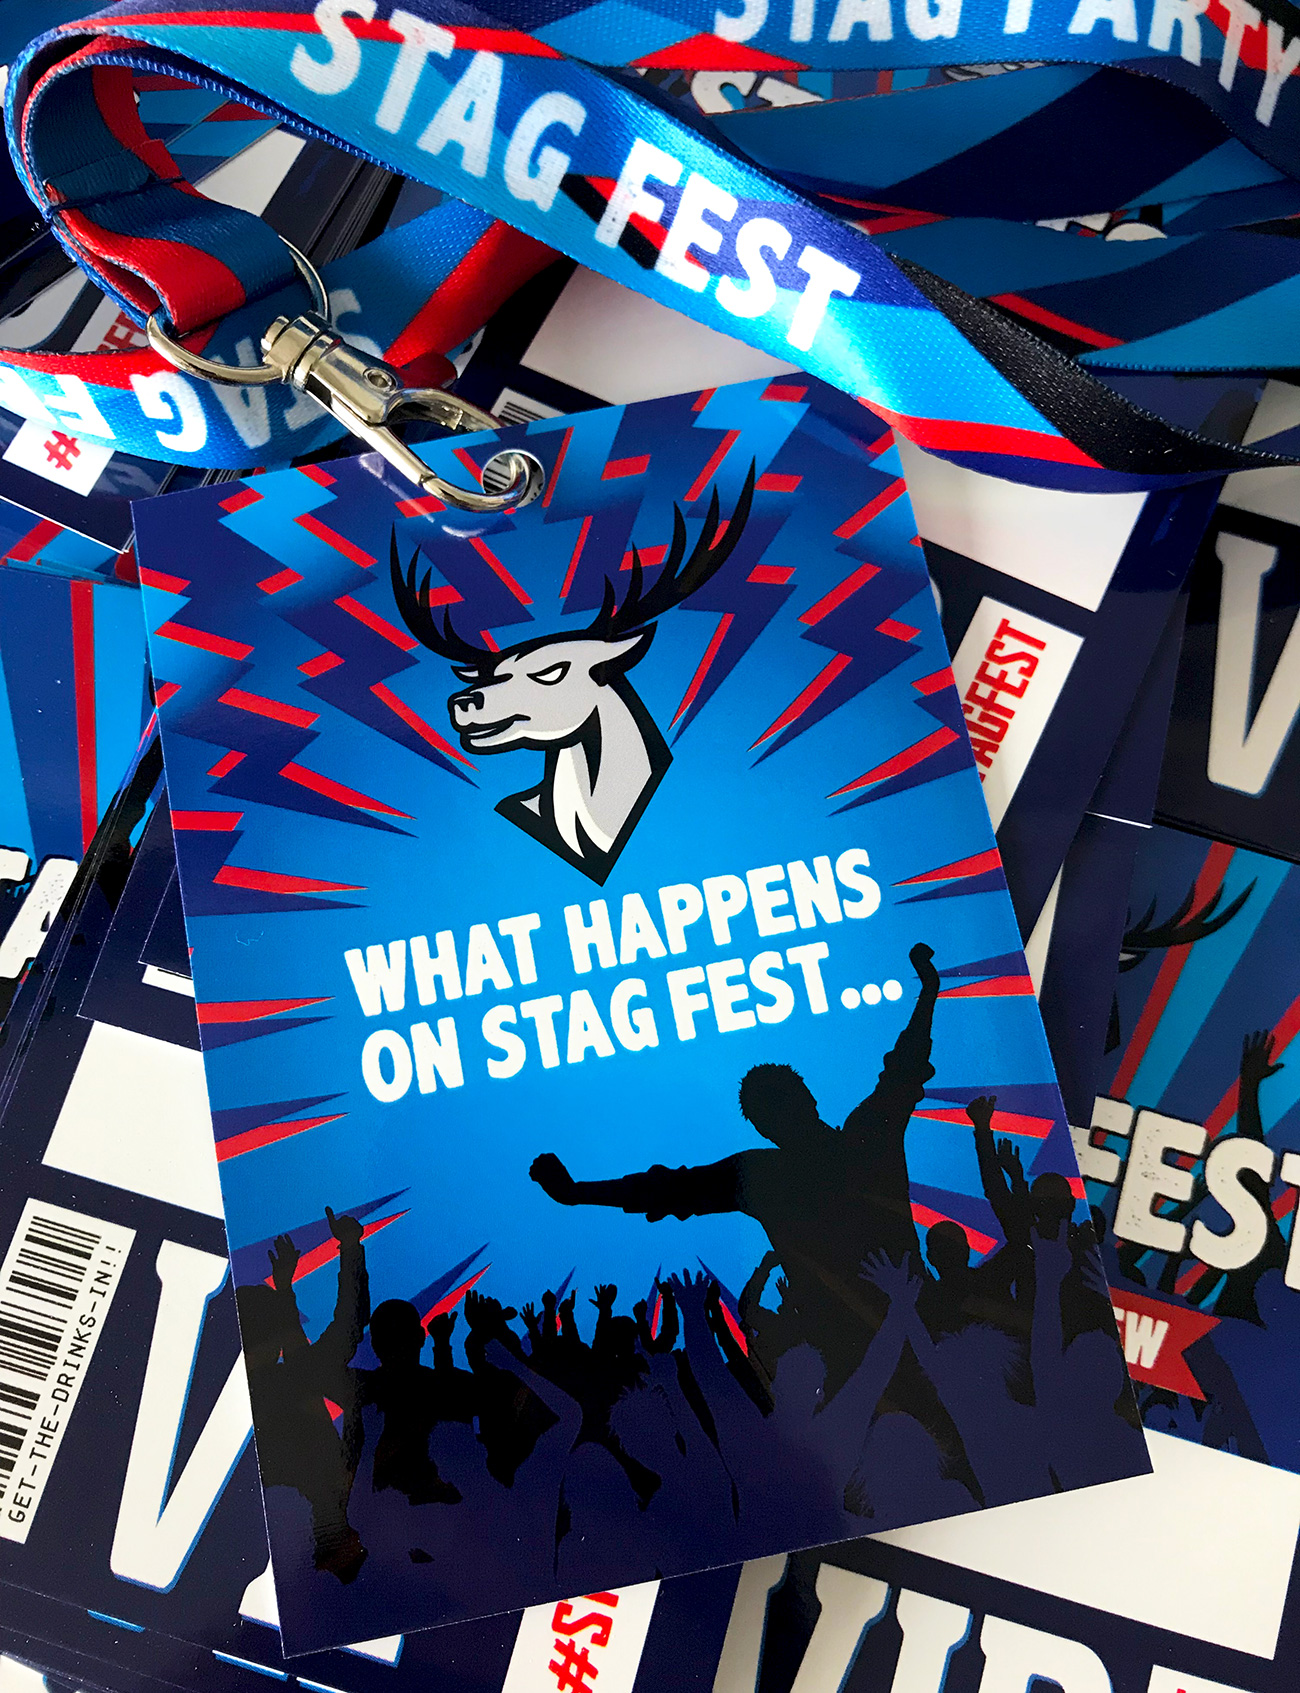 stag fest festival stag do party vip pass lanyards